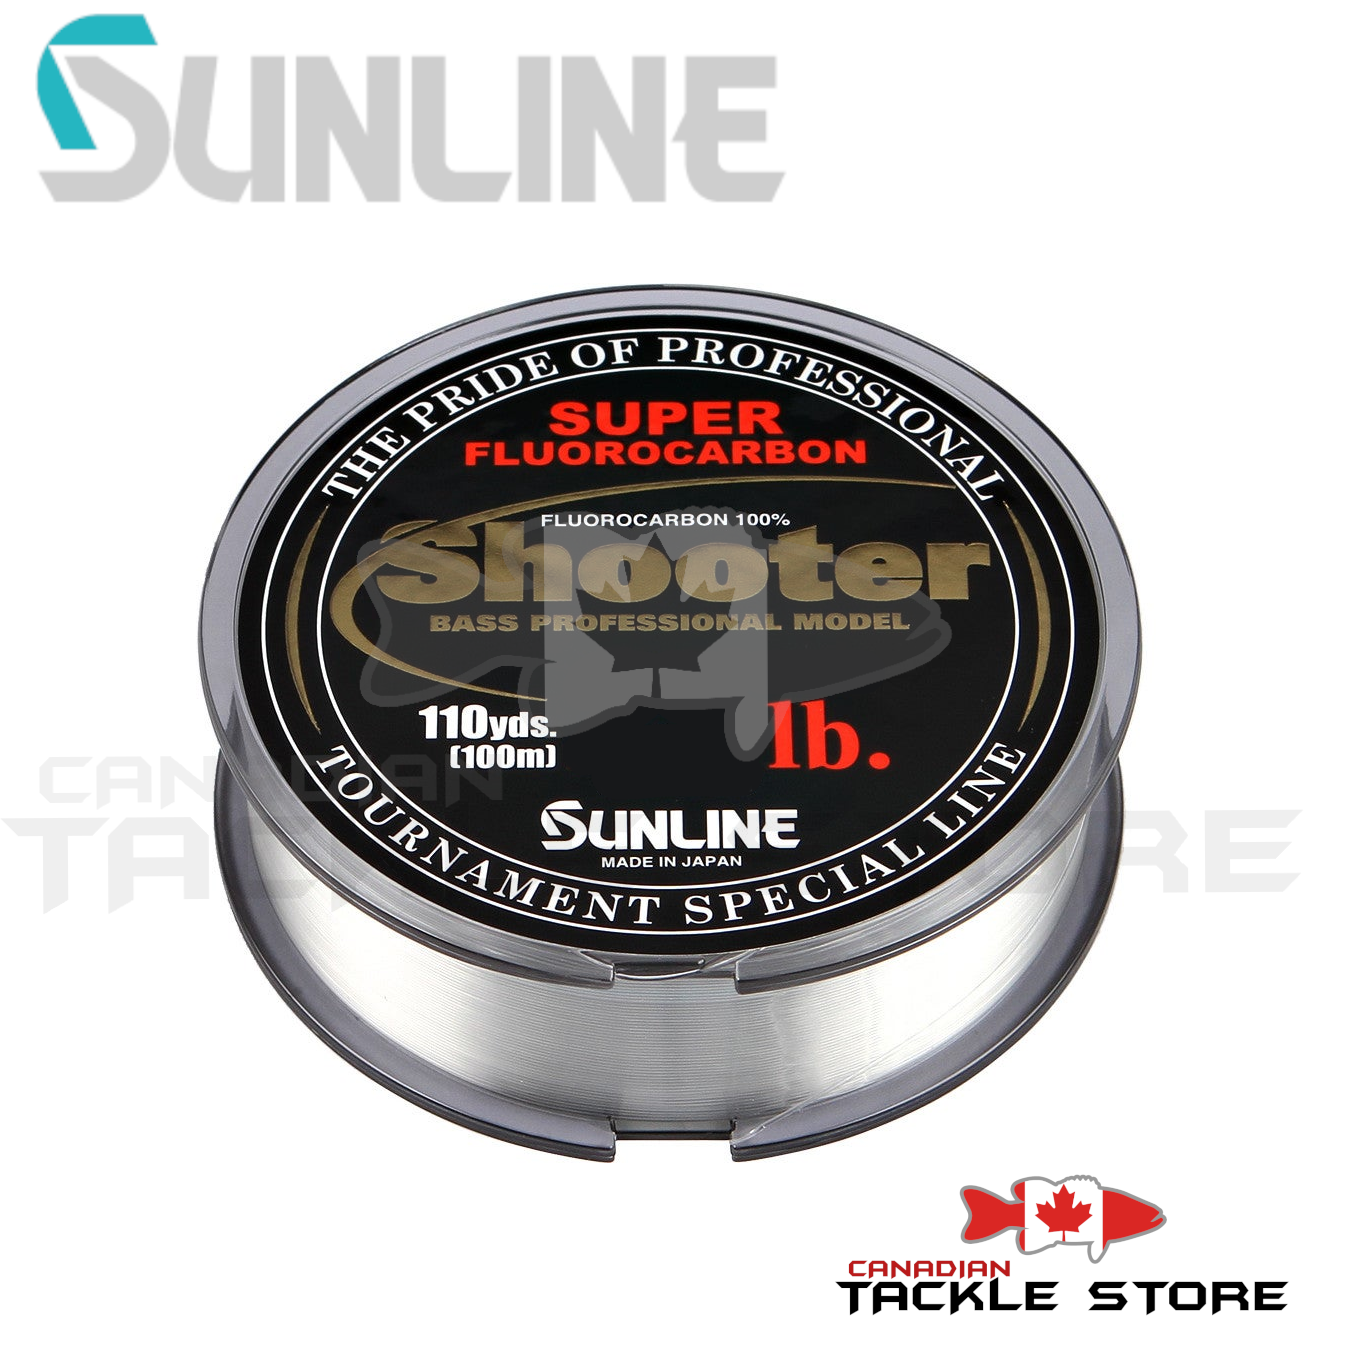 Sunline – Canadian Tackle Store